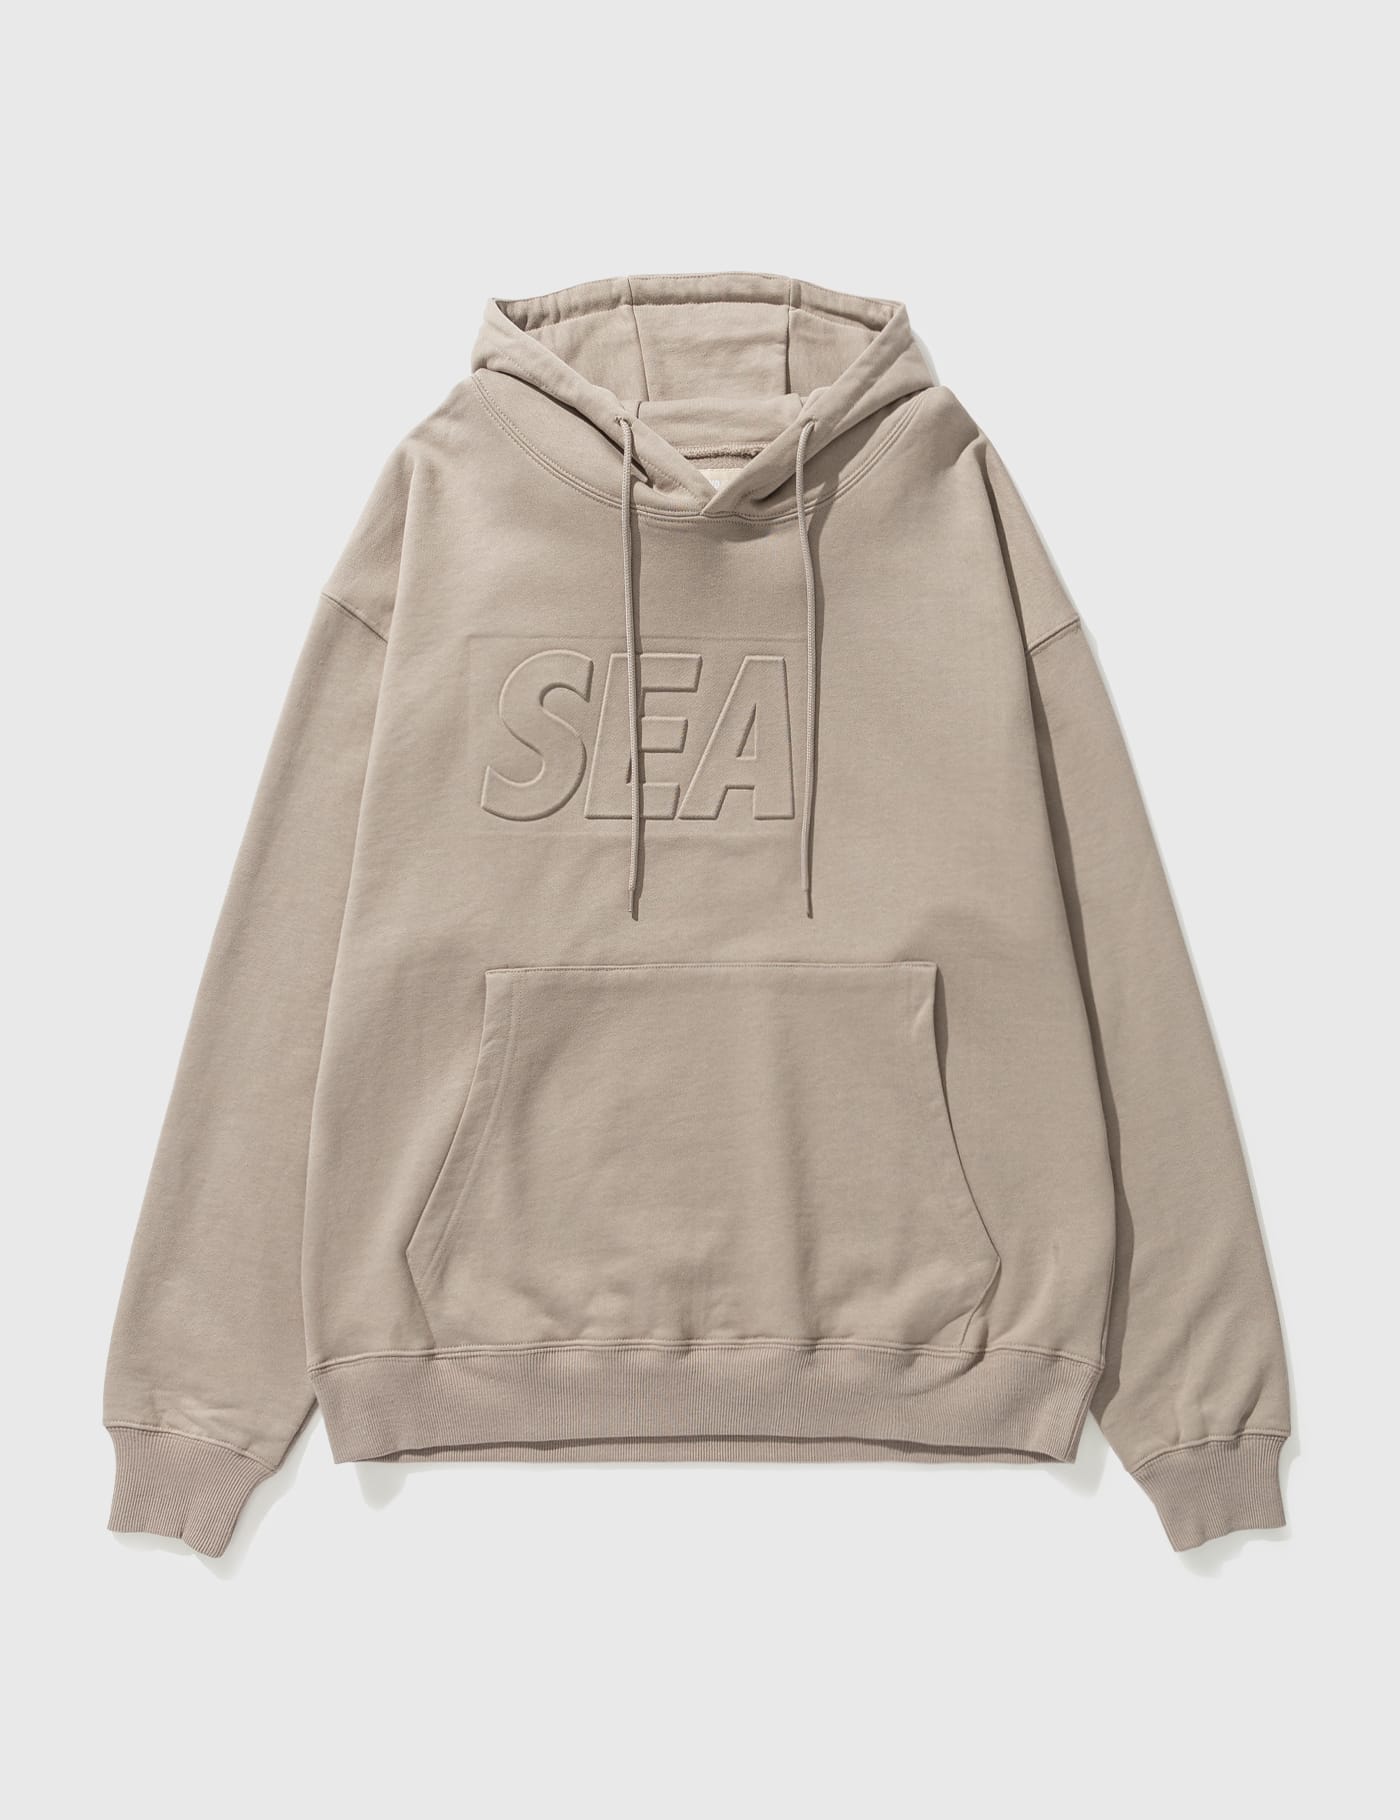 Wind And Sea - SEA Hoodie | HBX - Globally Curated Fashion and